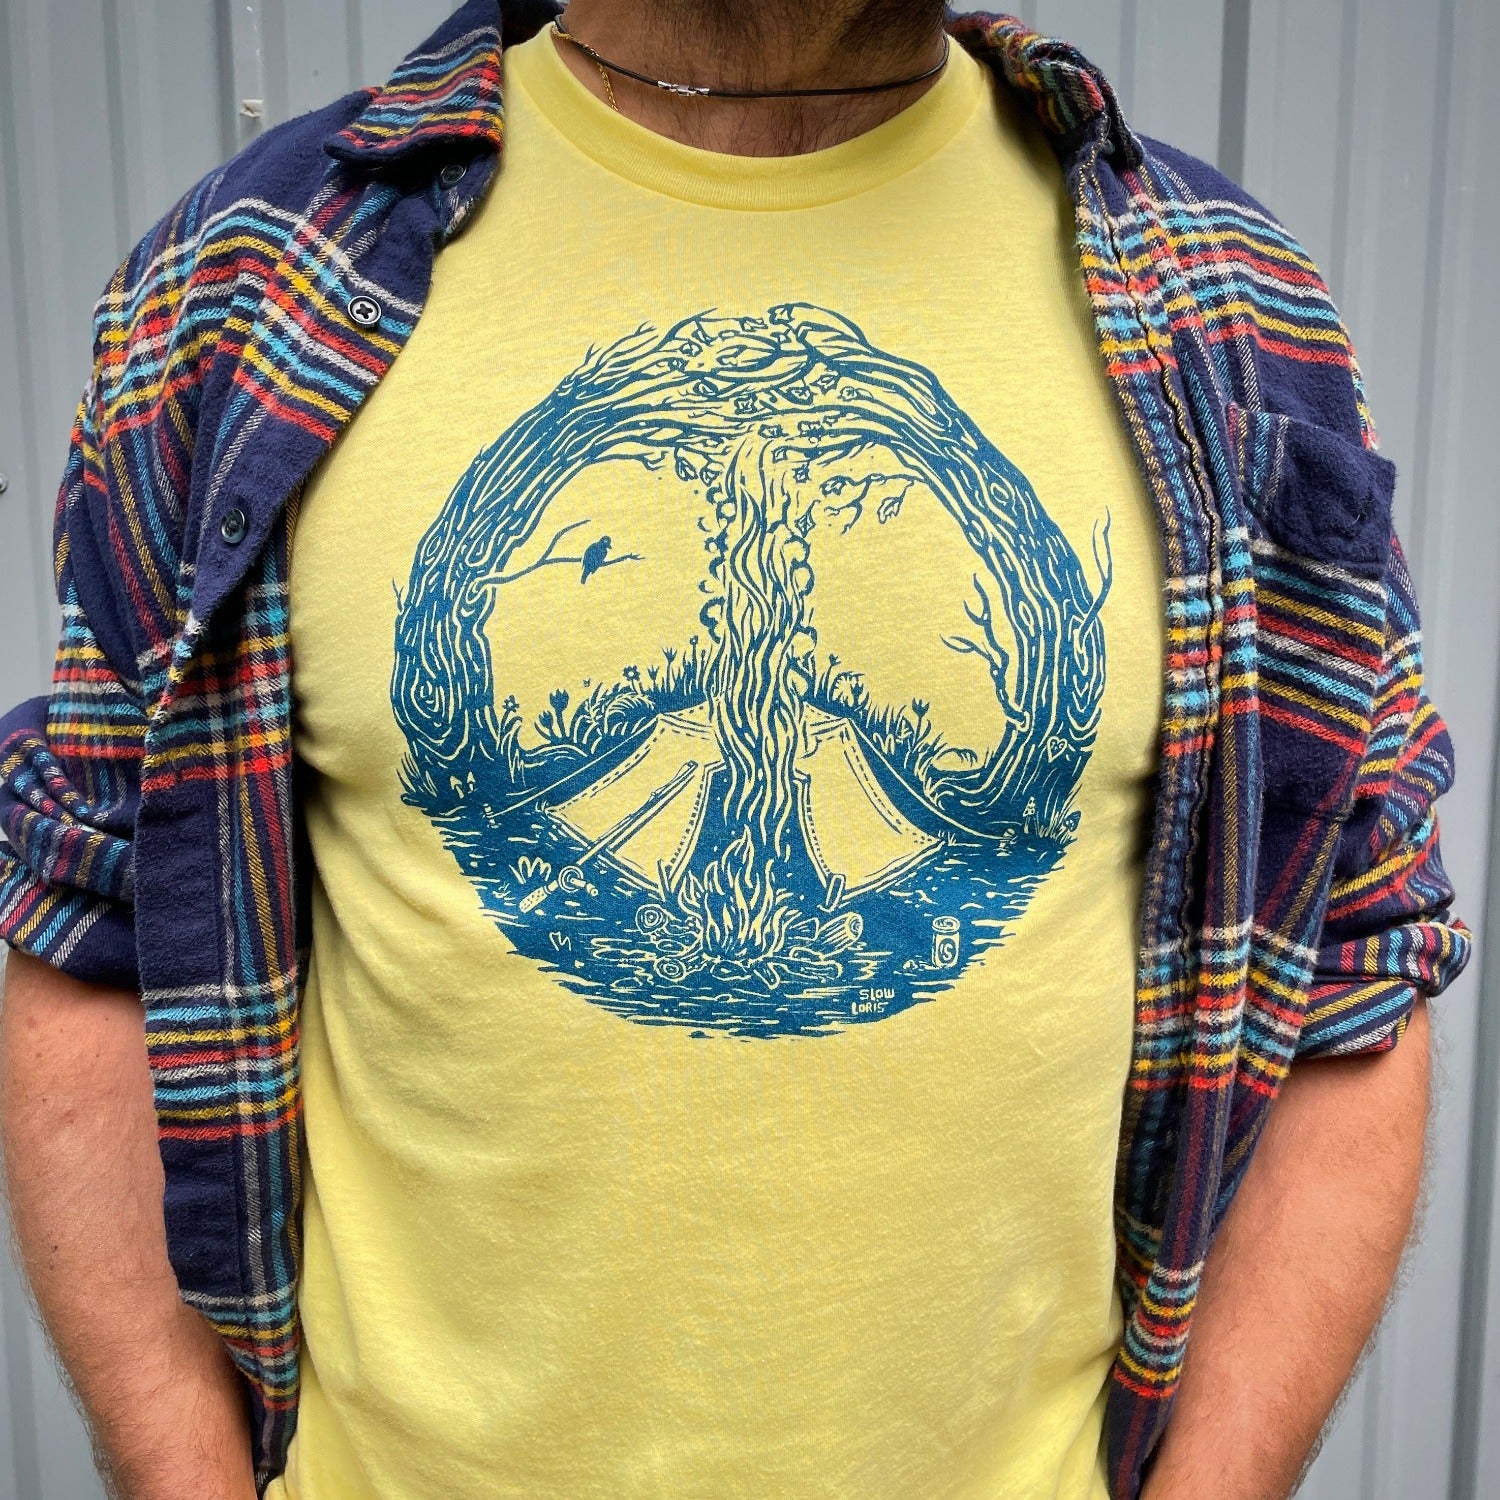  Close up of blue print on a yellow T. Print is of a campfire's smoke going up the center meeting with the tops of curved in trees creating a peace sign. Tent is by the fire and a bird is on a branch